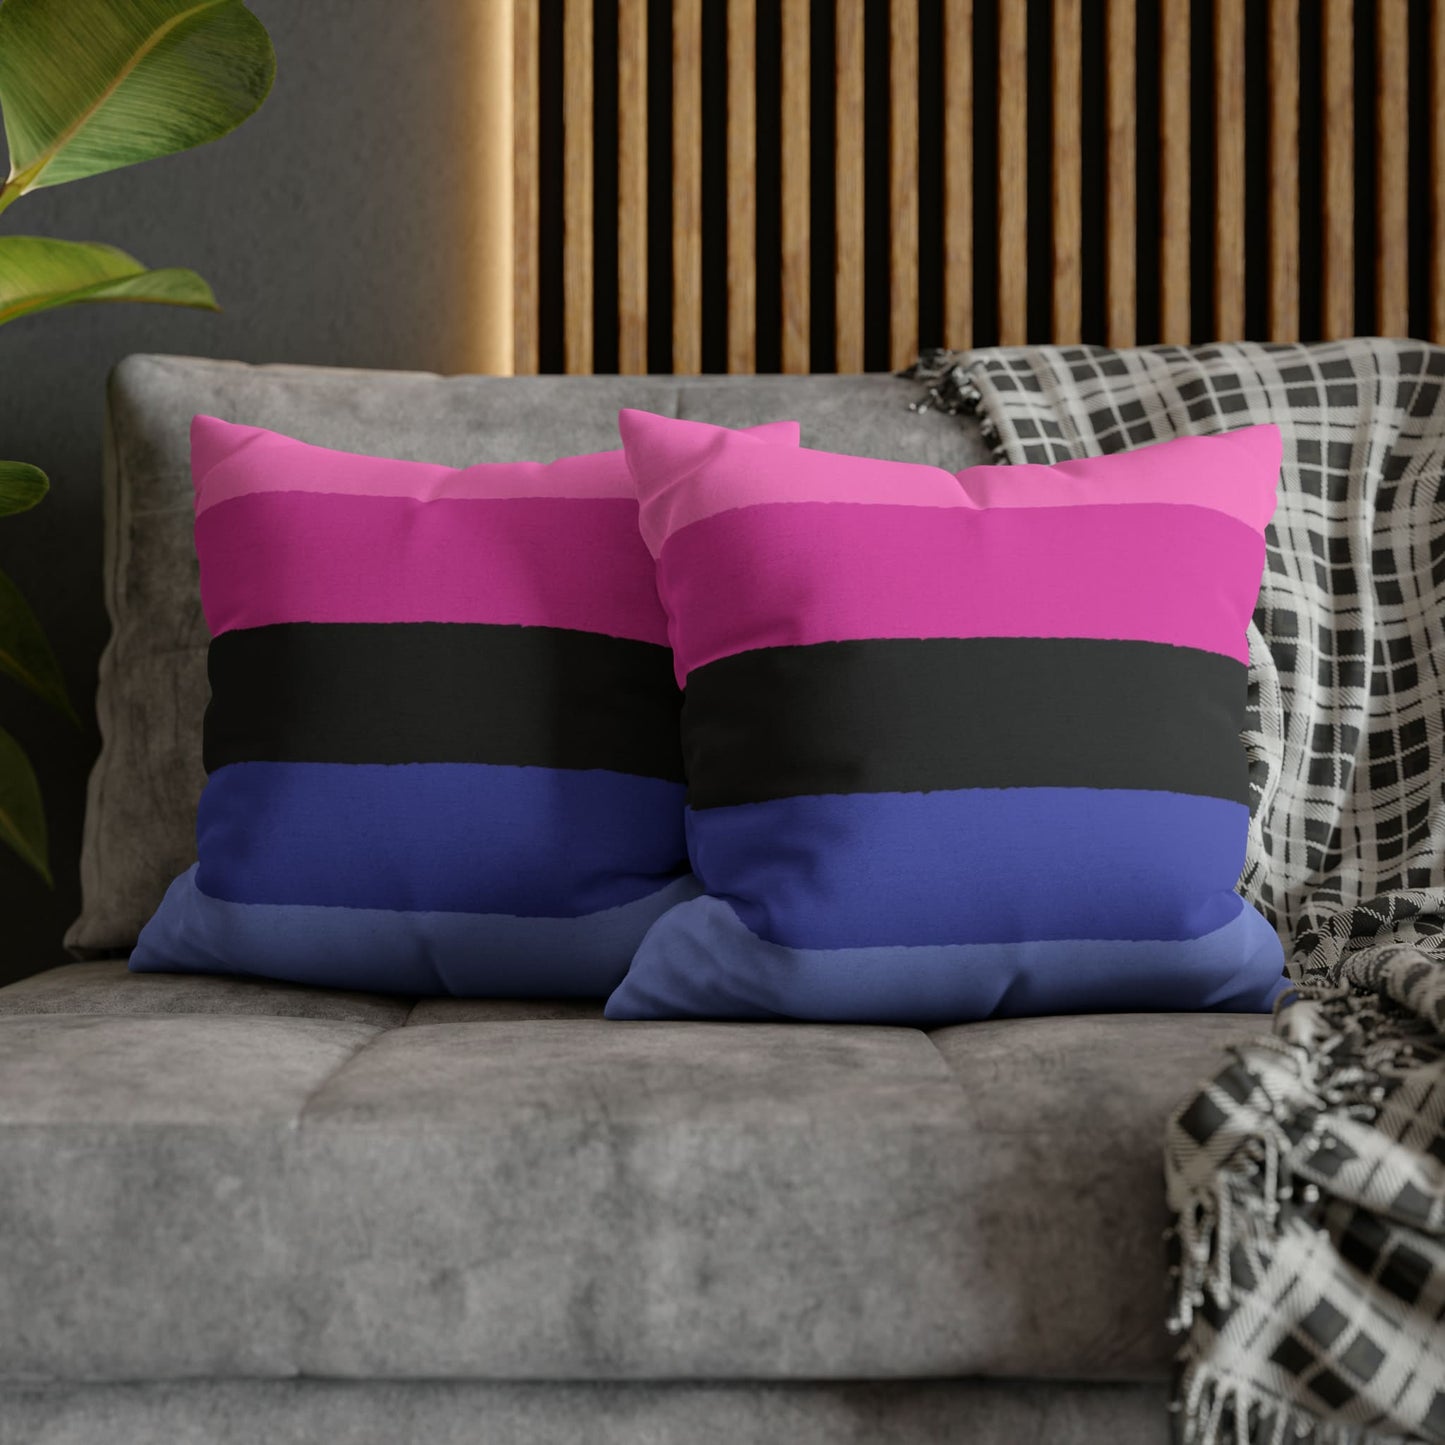 2 omnisexual pillow on couch